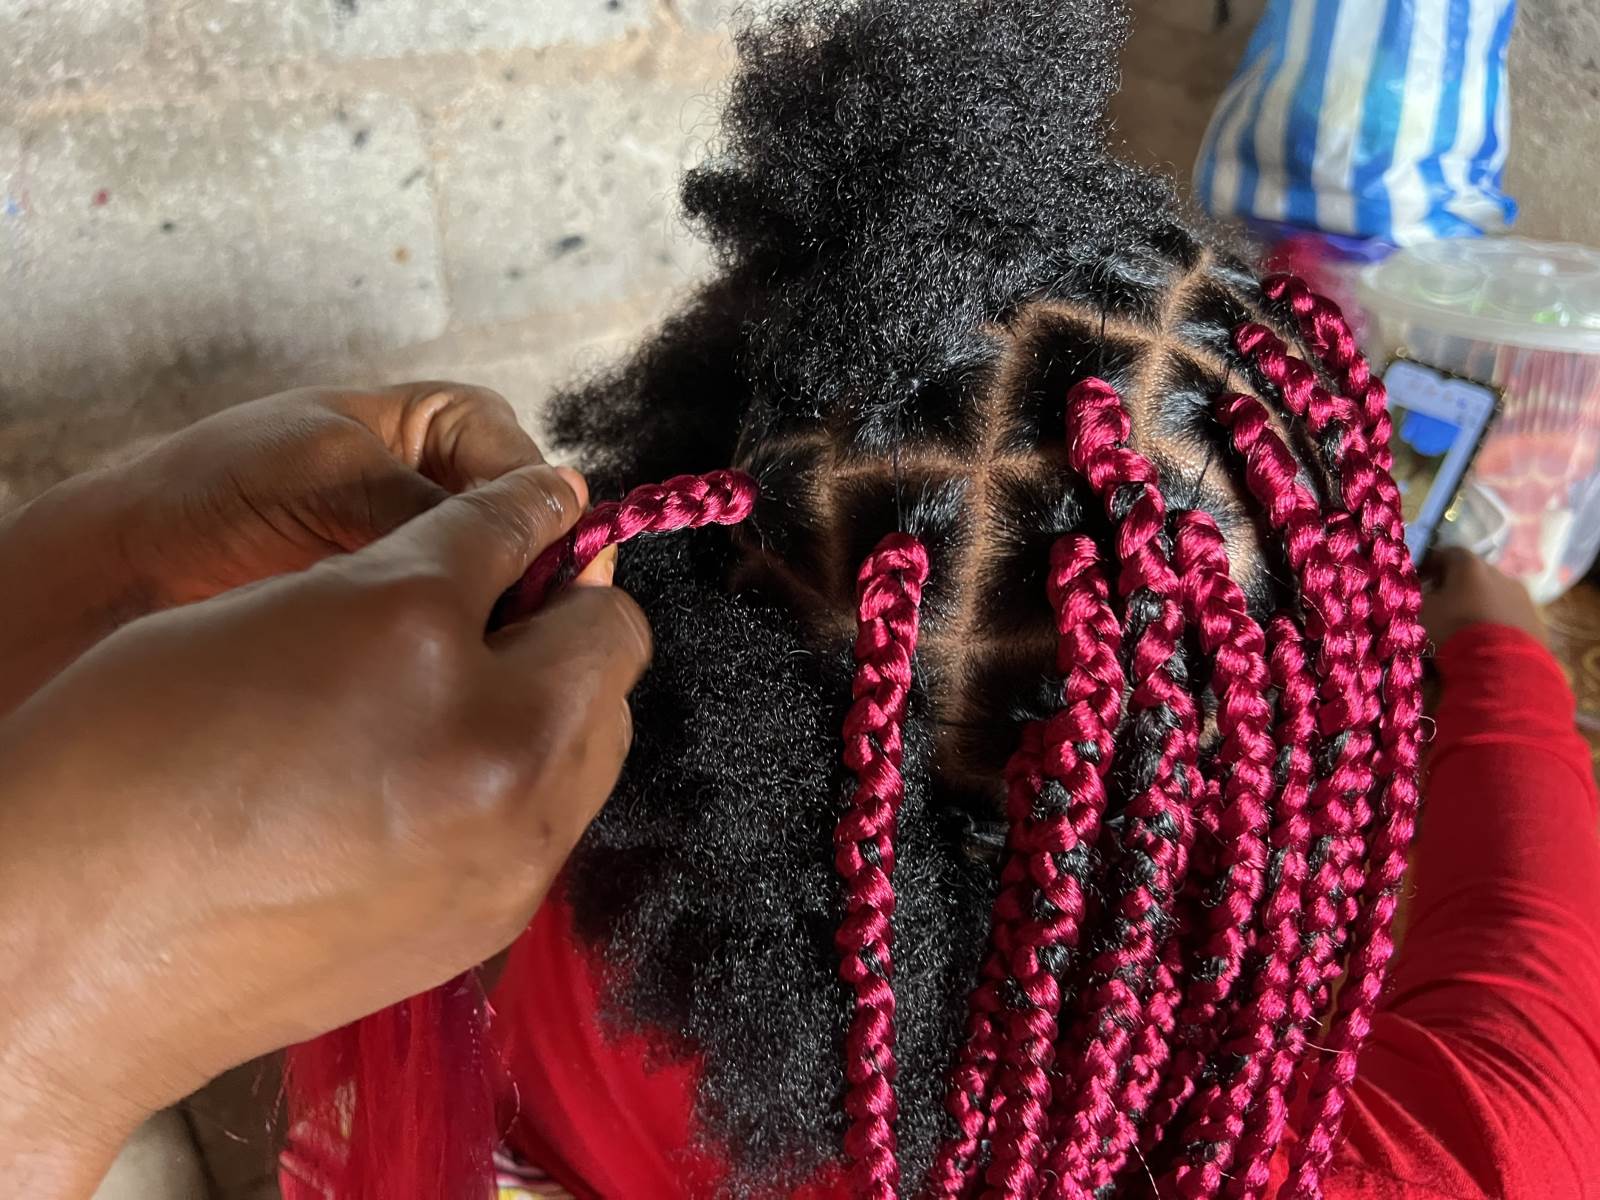 Surprising Hair Braiding Traditions: Vikings Vs Africans – Who Started The Trend First?